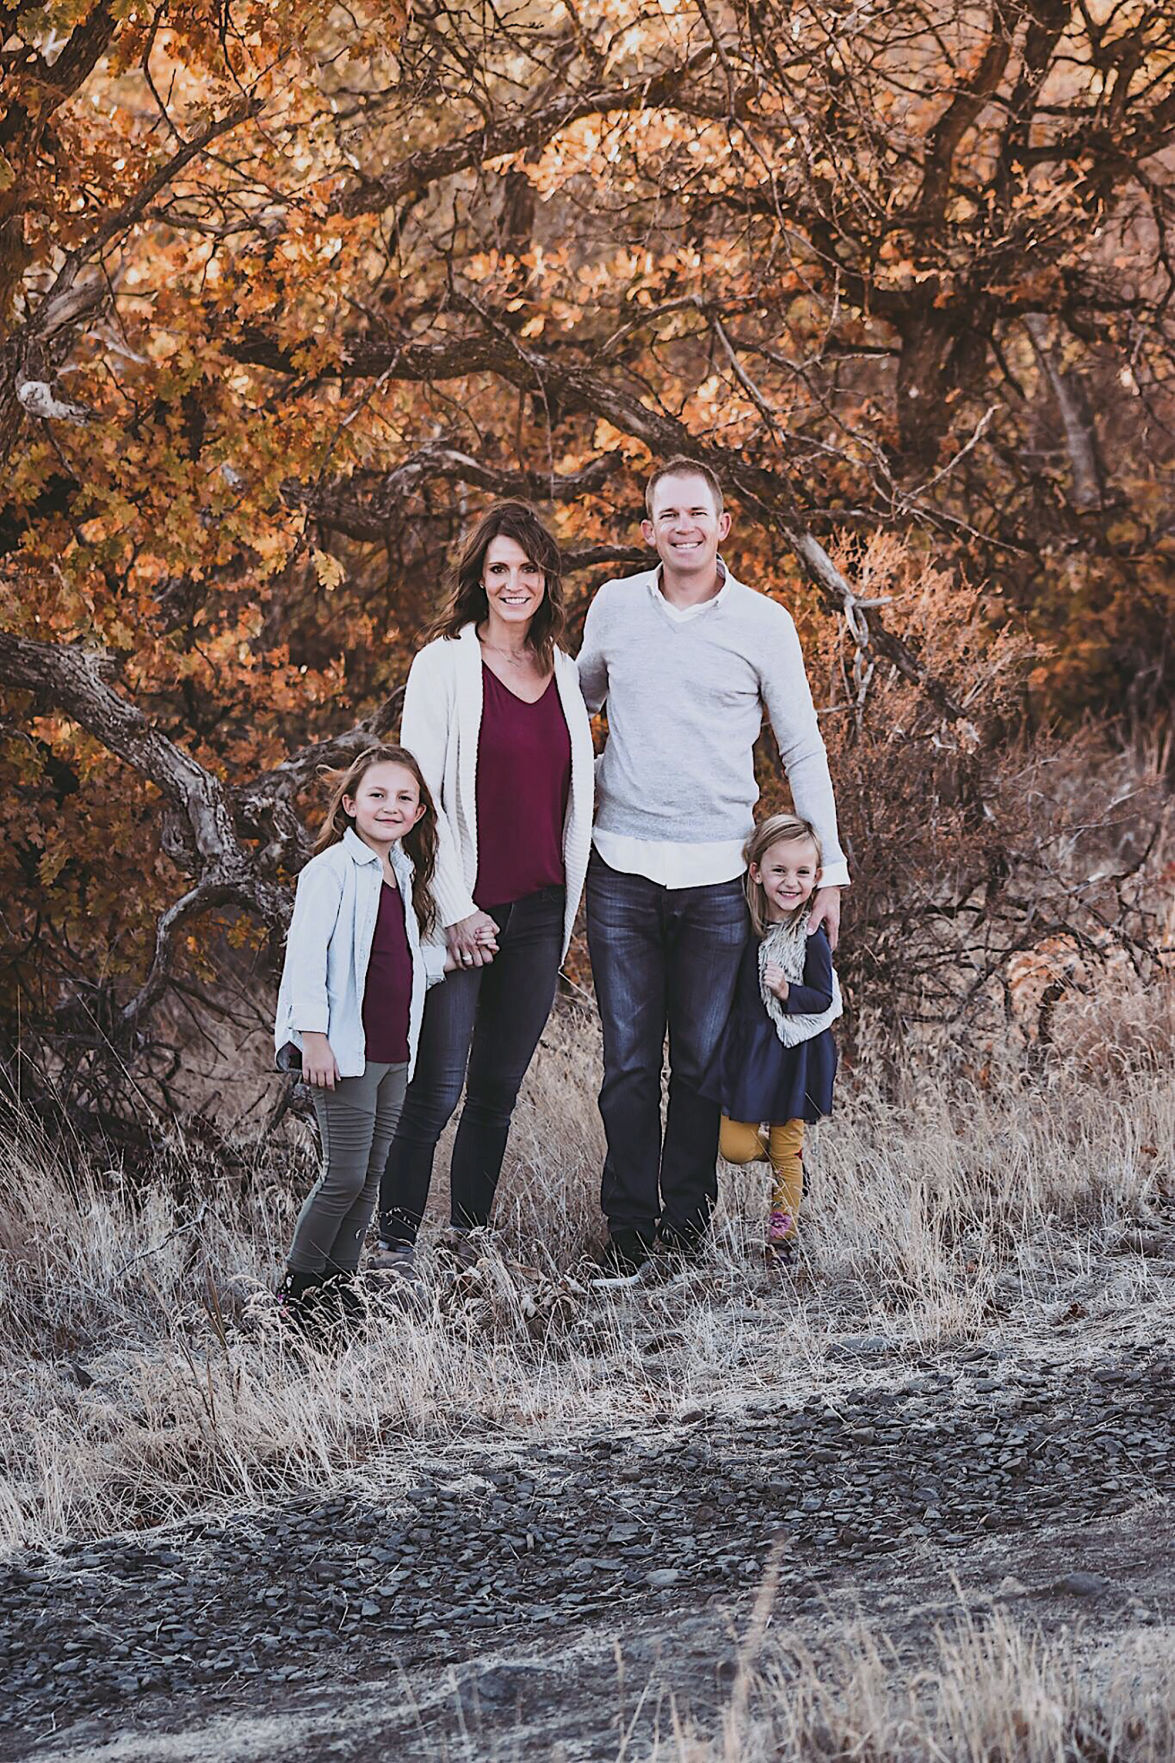 Top 10 list of family photography tips by Courtney Keim